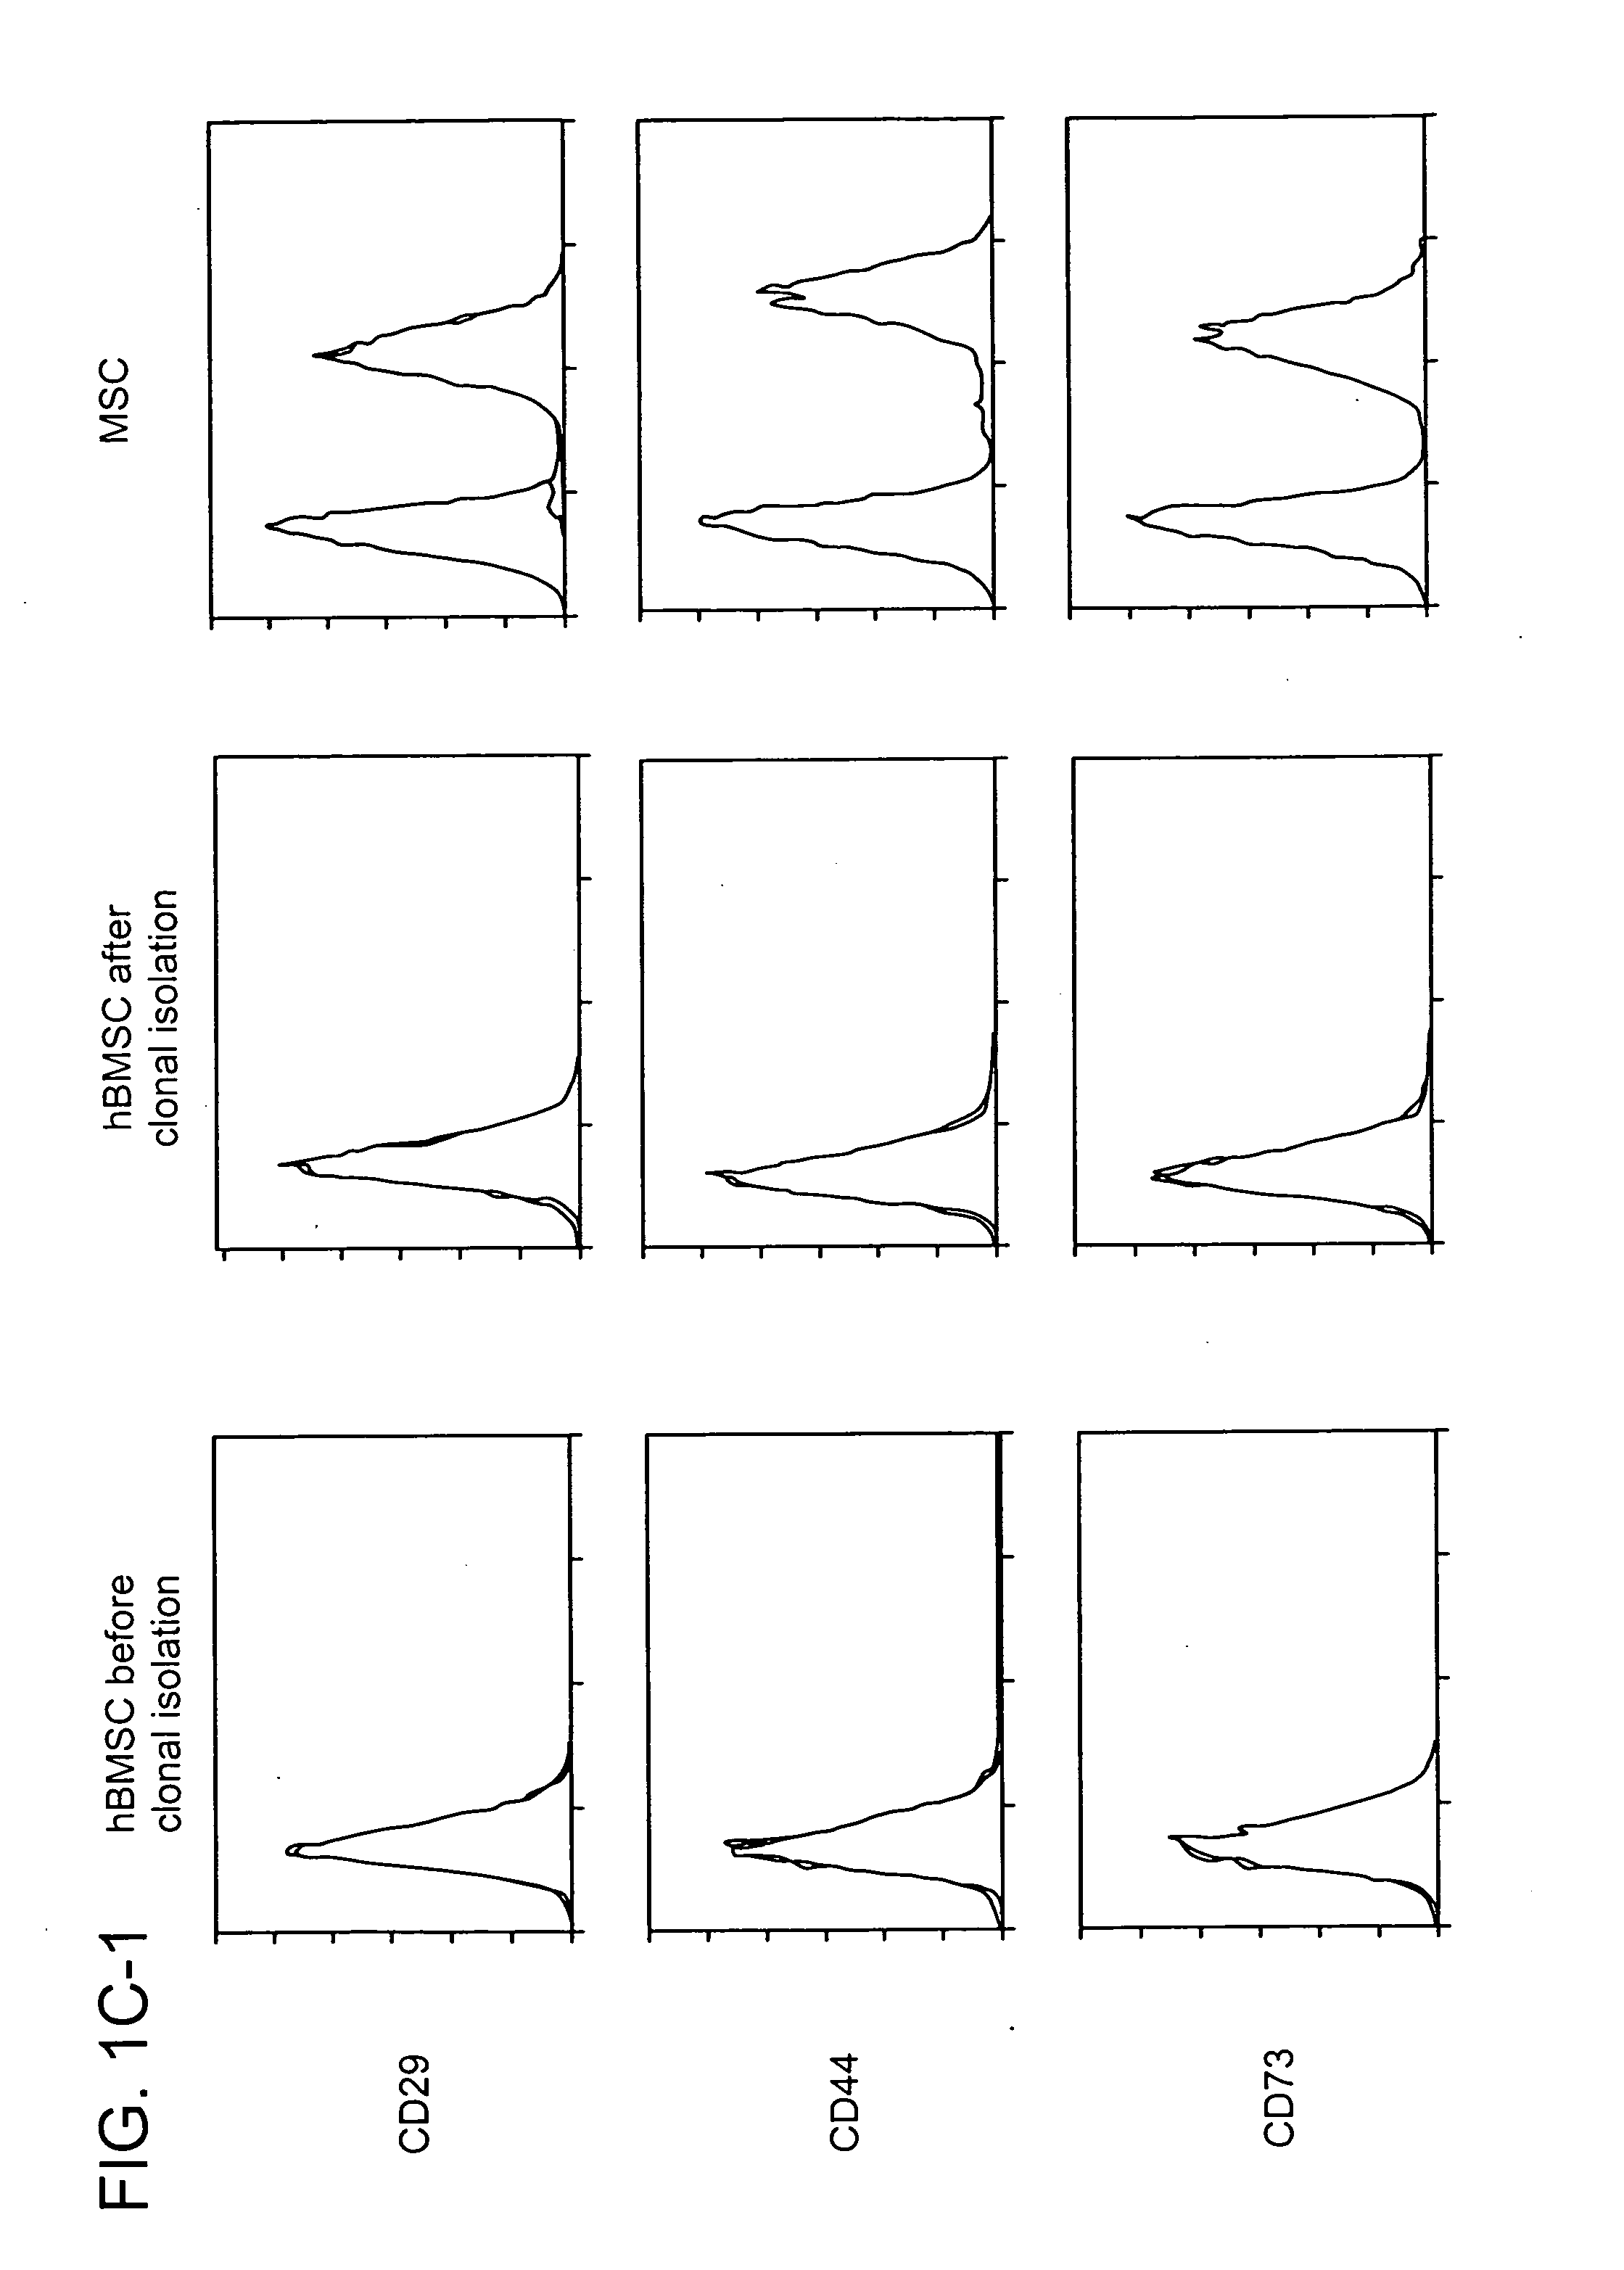 Novel multipotent stem cells and use thereof